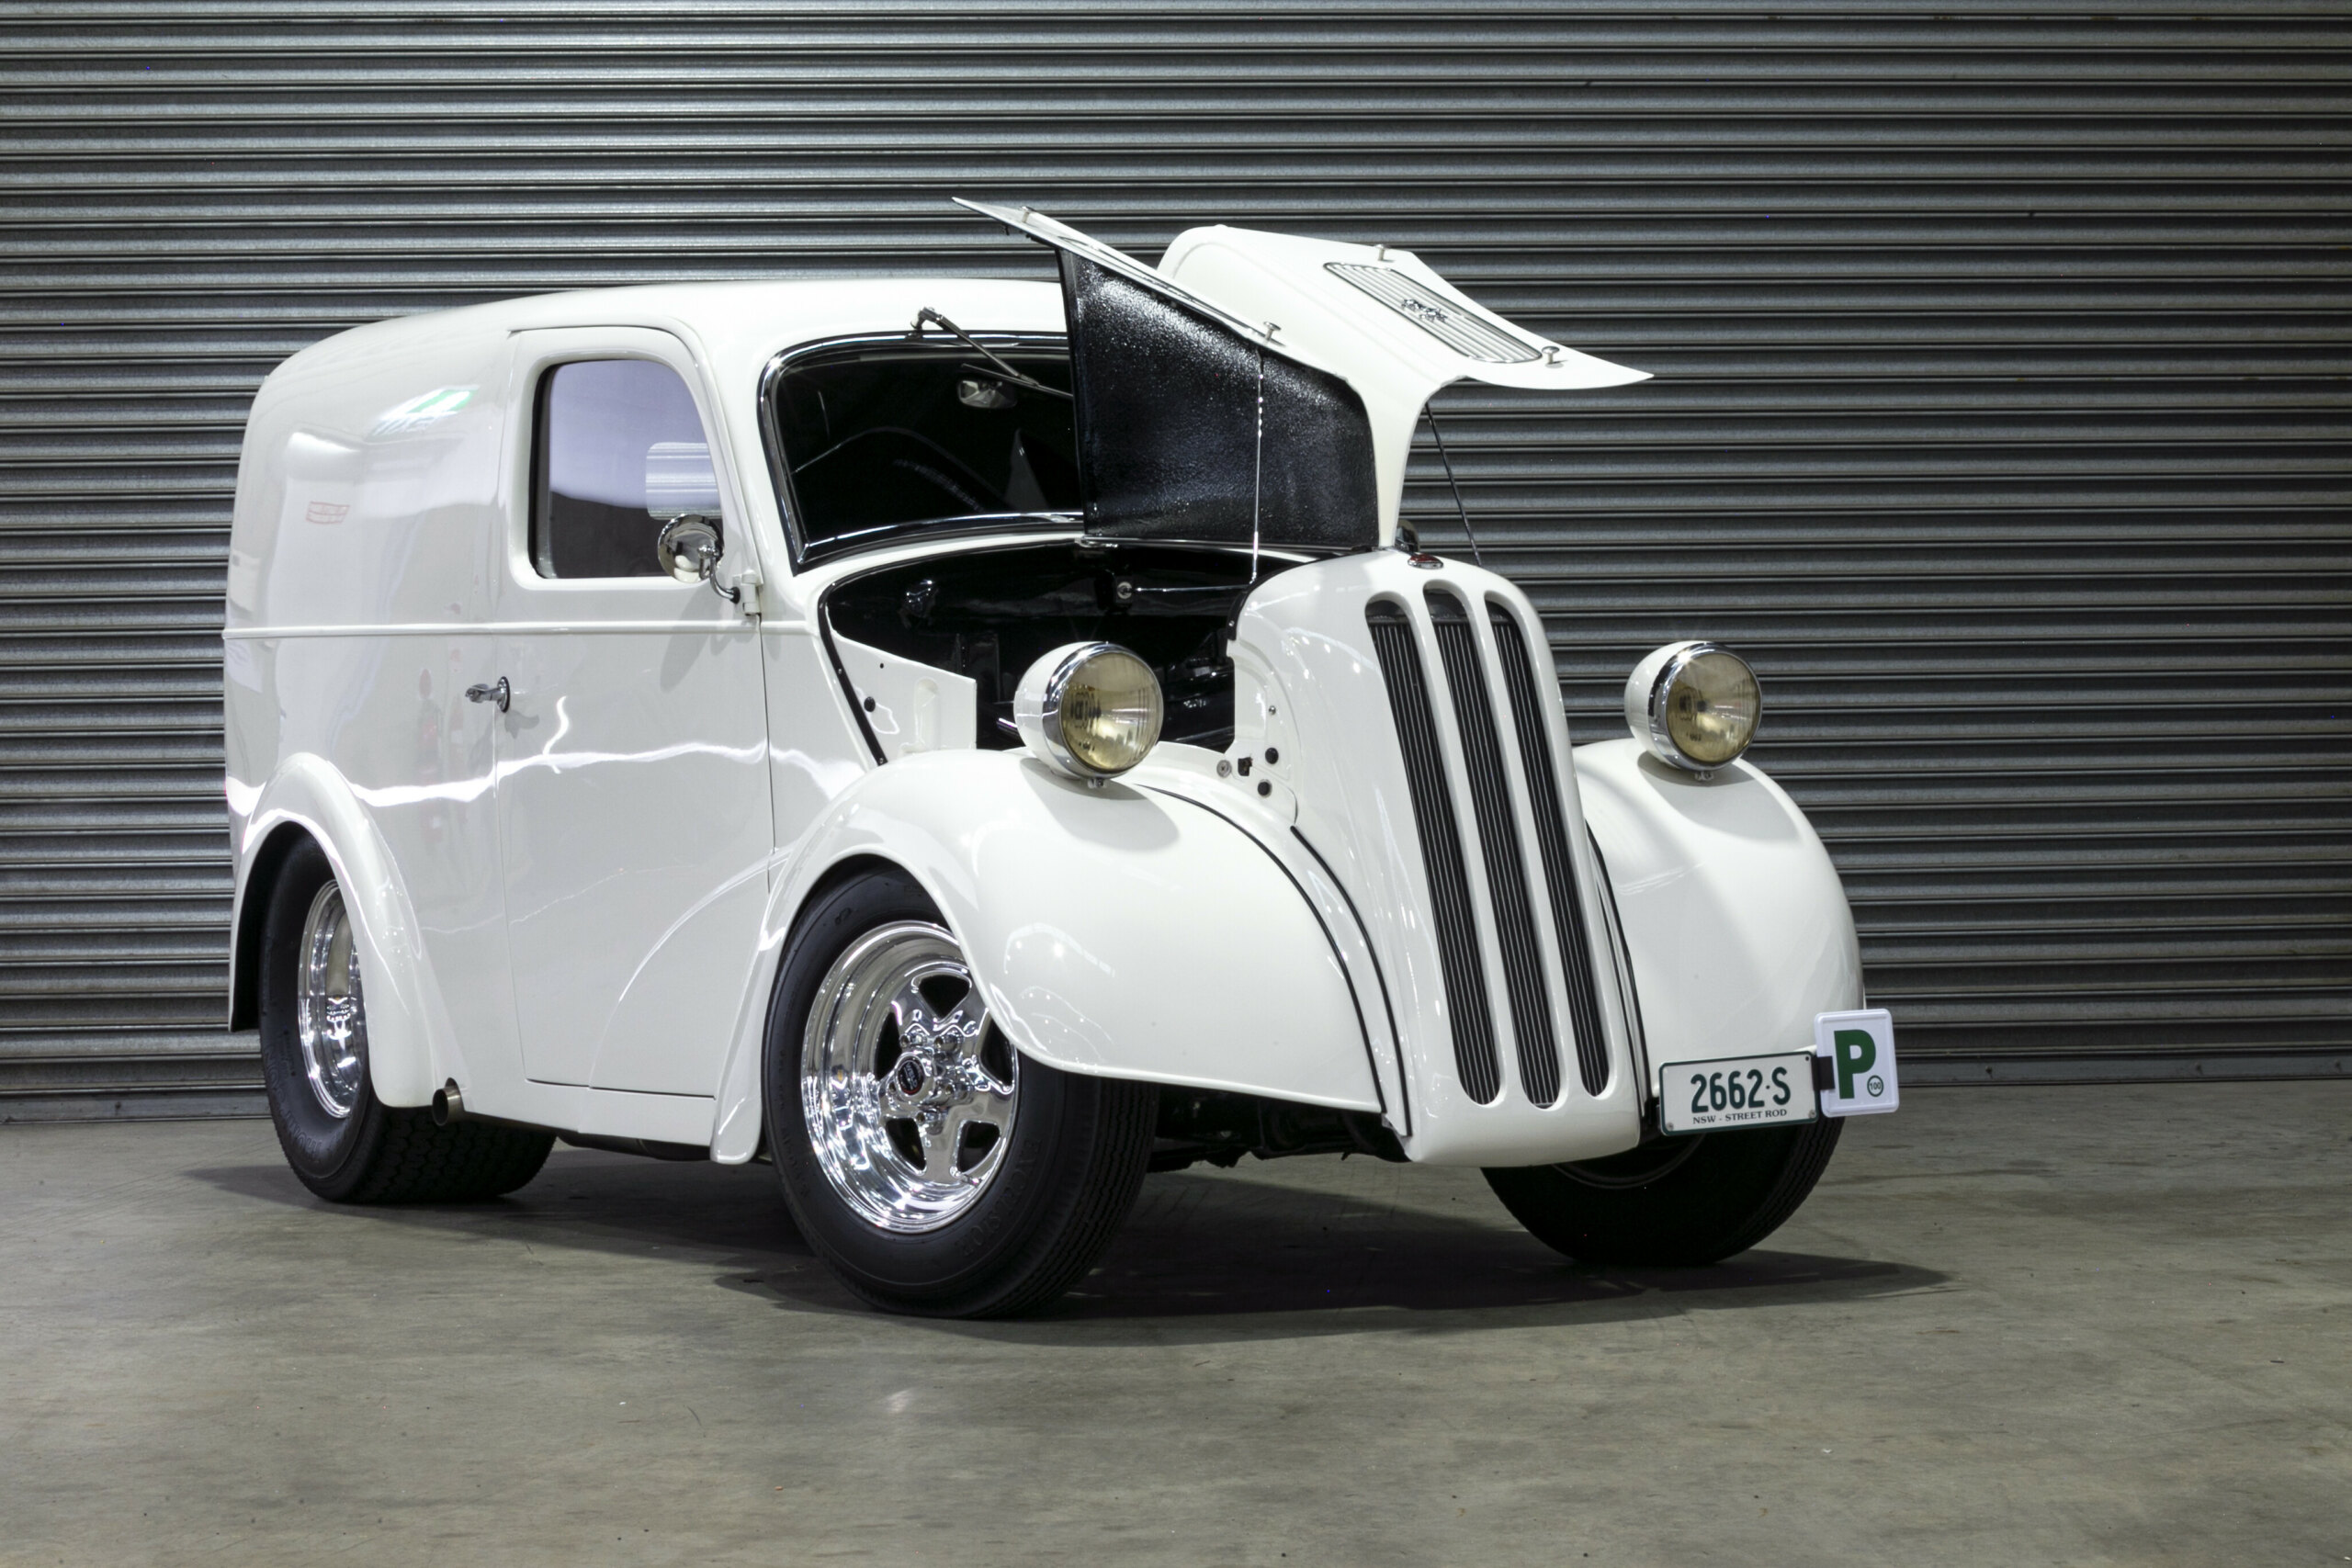 Milwaukee Young SMOTY 2023: Barra-swapped ’48 Ford Anglia hits the track